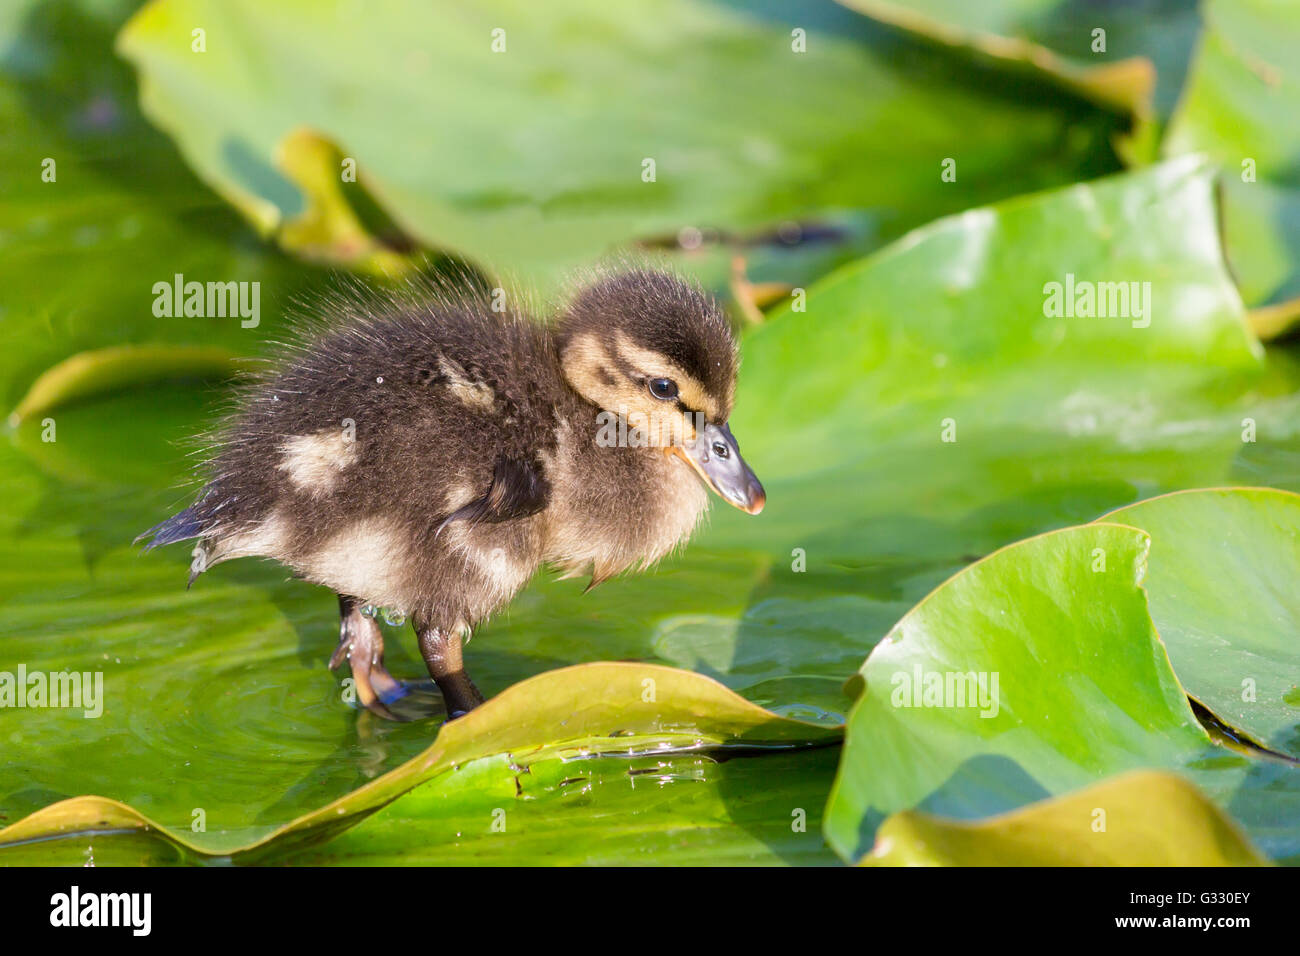 Brown baby duck walking on water lily leaves in spring season Stock Photo